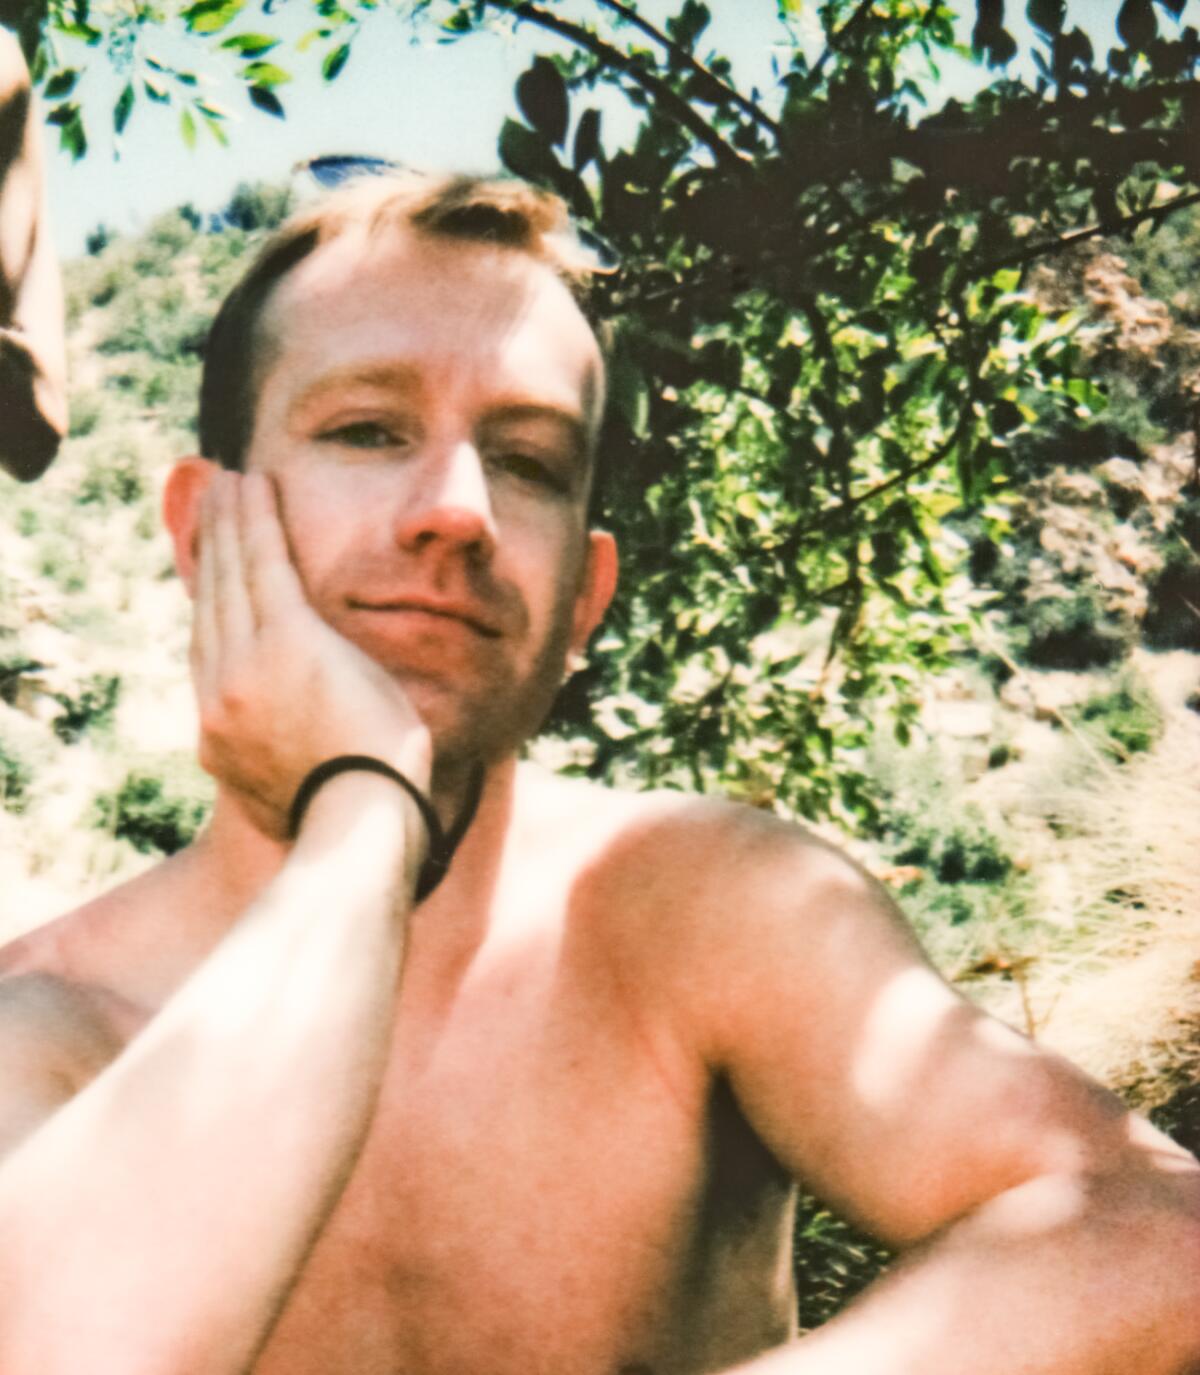 Patrick Nathan, shirtless, sits under a tree and rests his hand on his cheek.